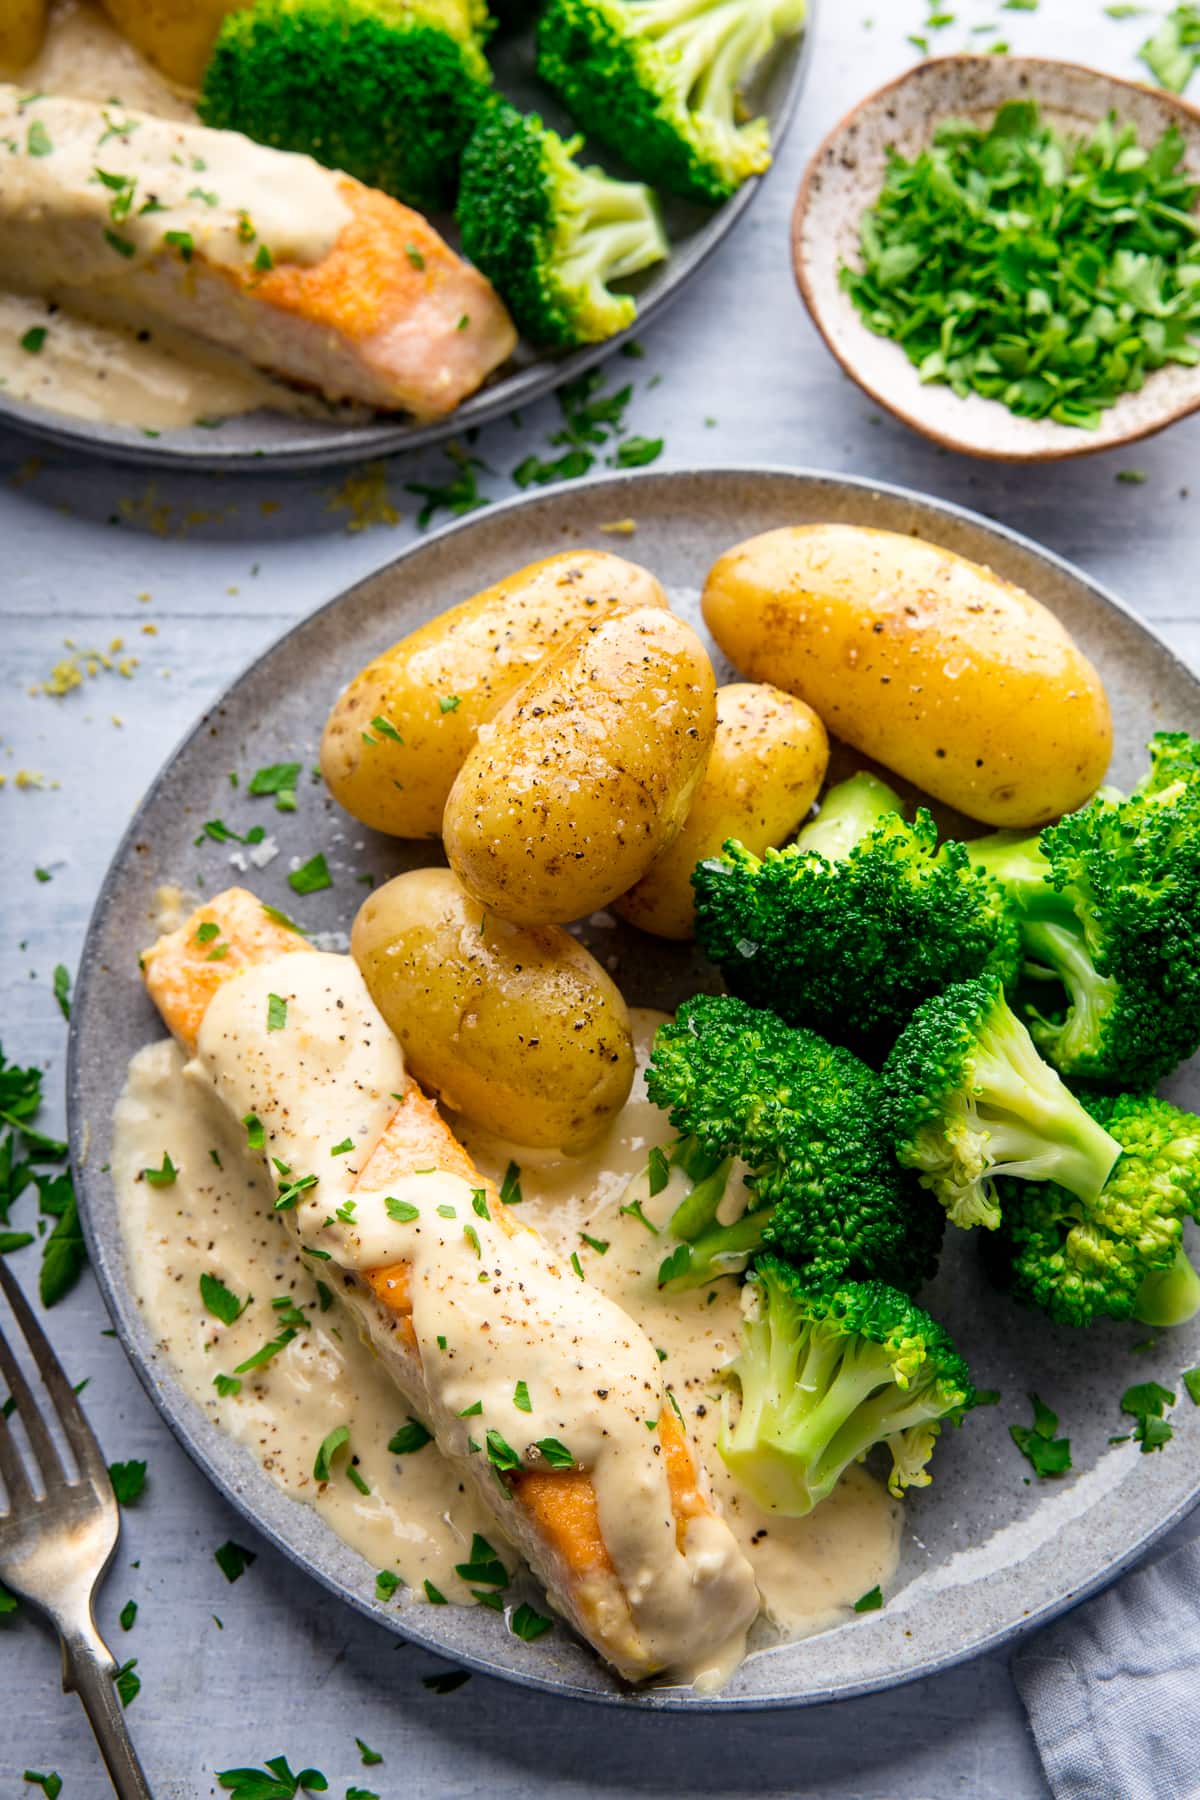 Grey plate with salmon drizzled in a creamy sauce served with broccoli and potatoes